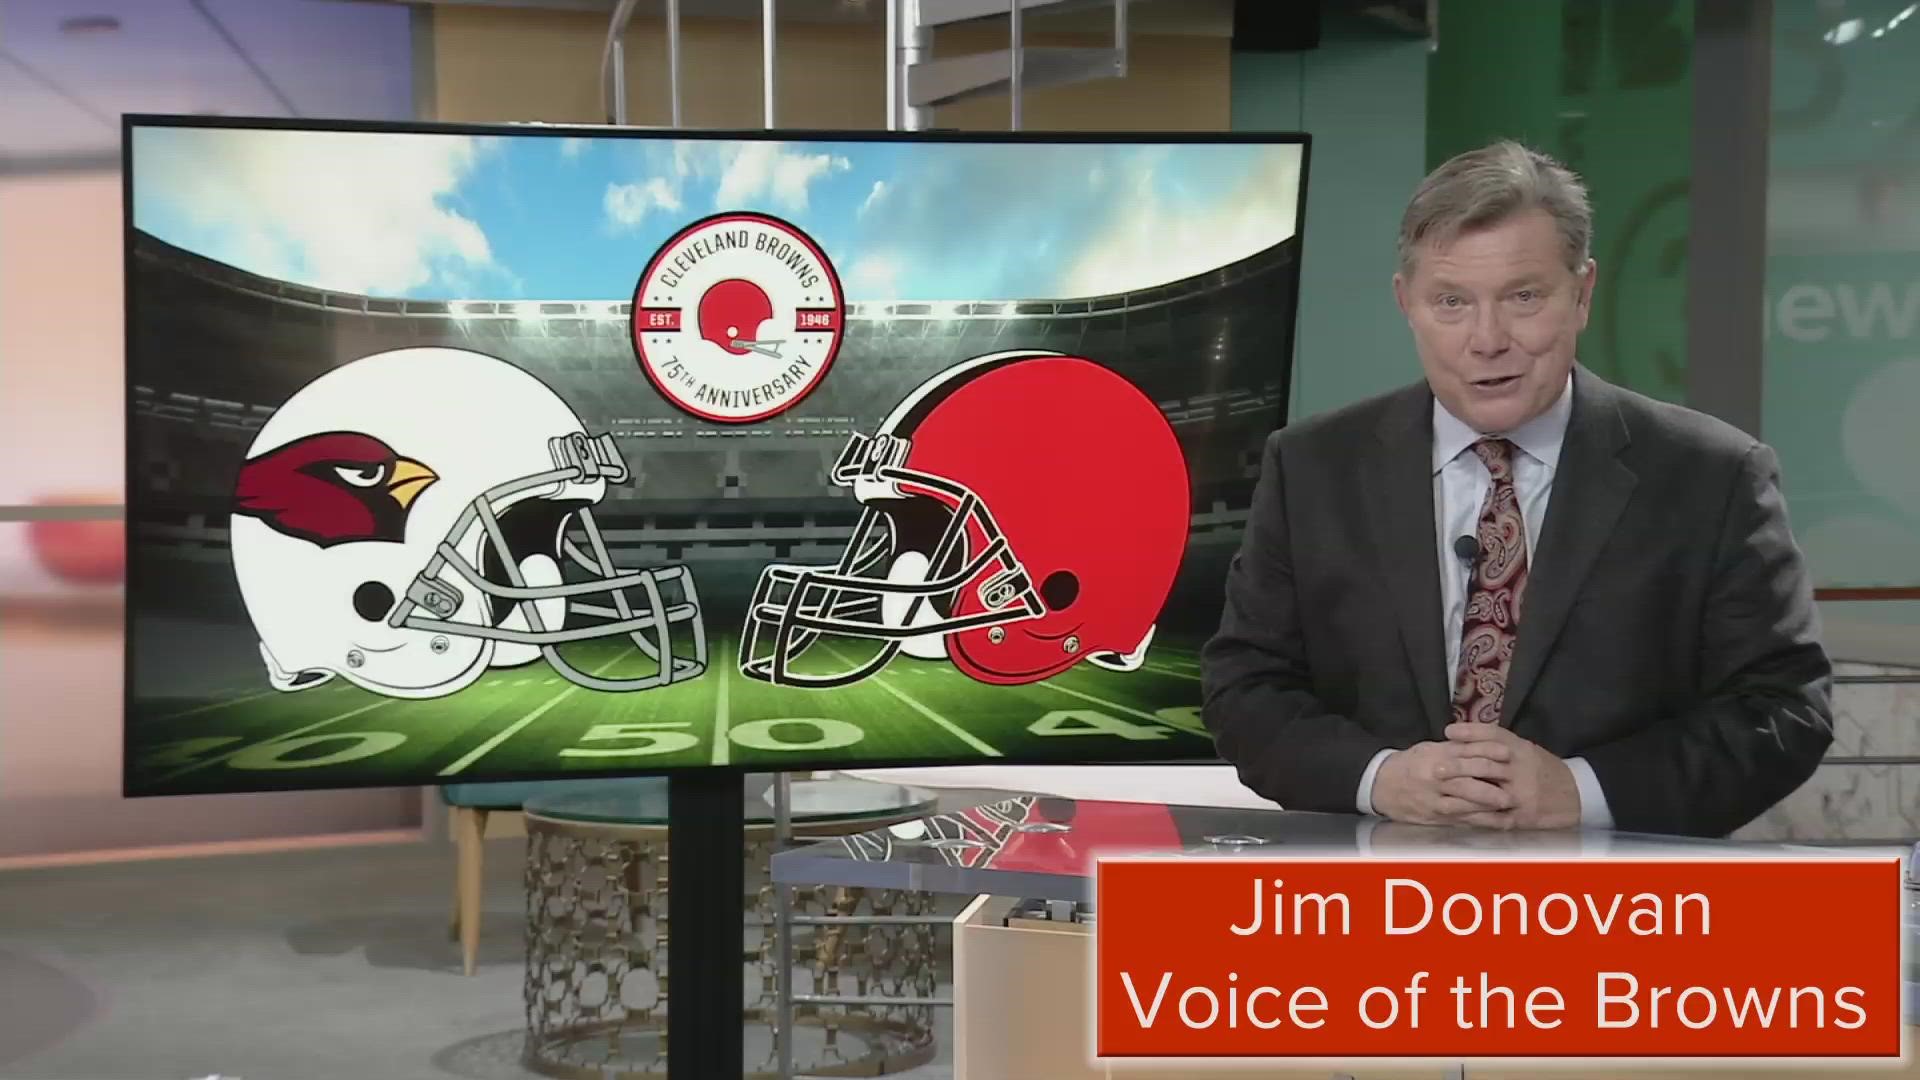 Voice of the Browns Jim Donovan has a preview of the upcoming Cleveland Browns game.